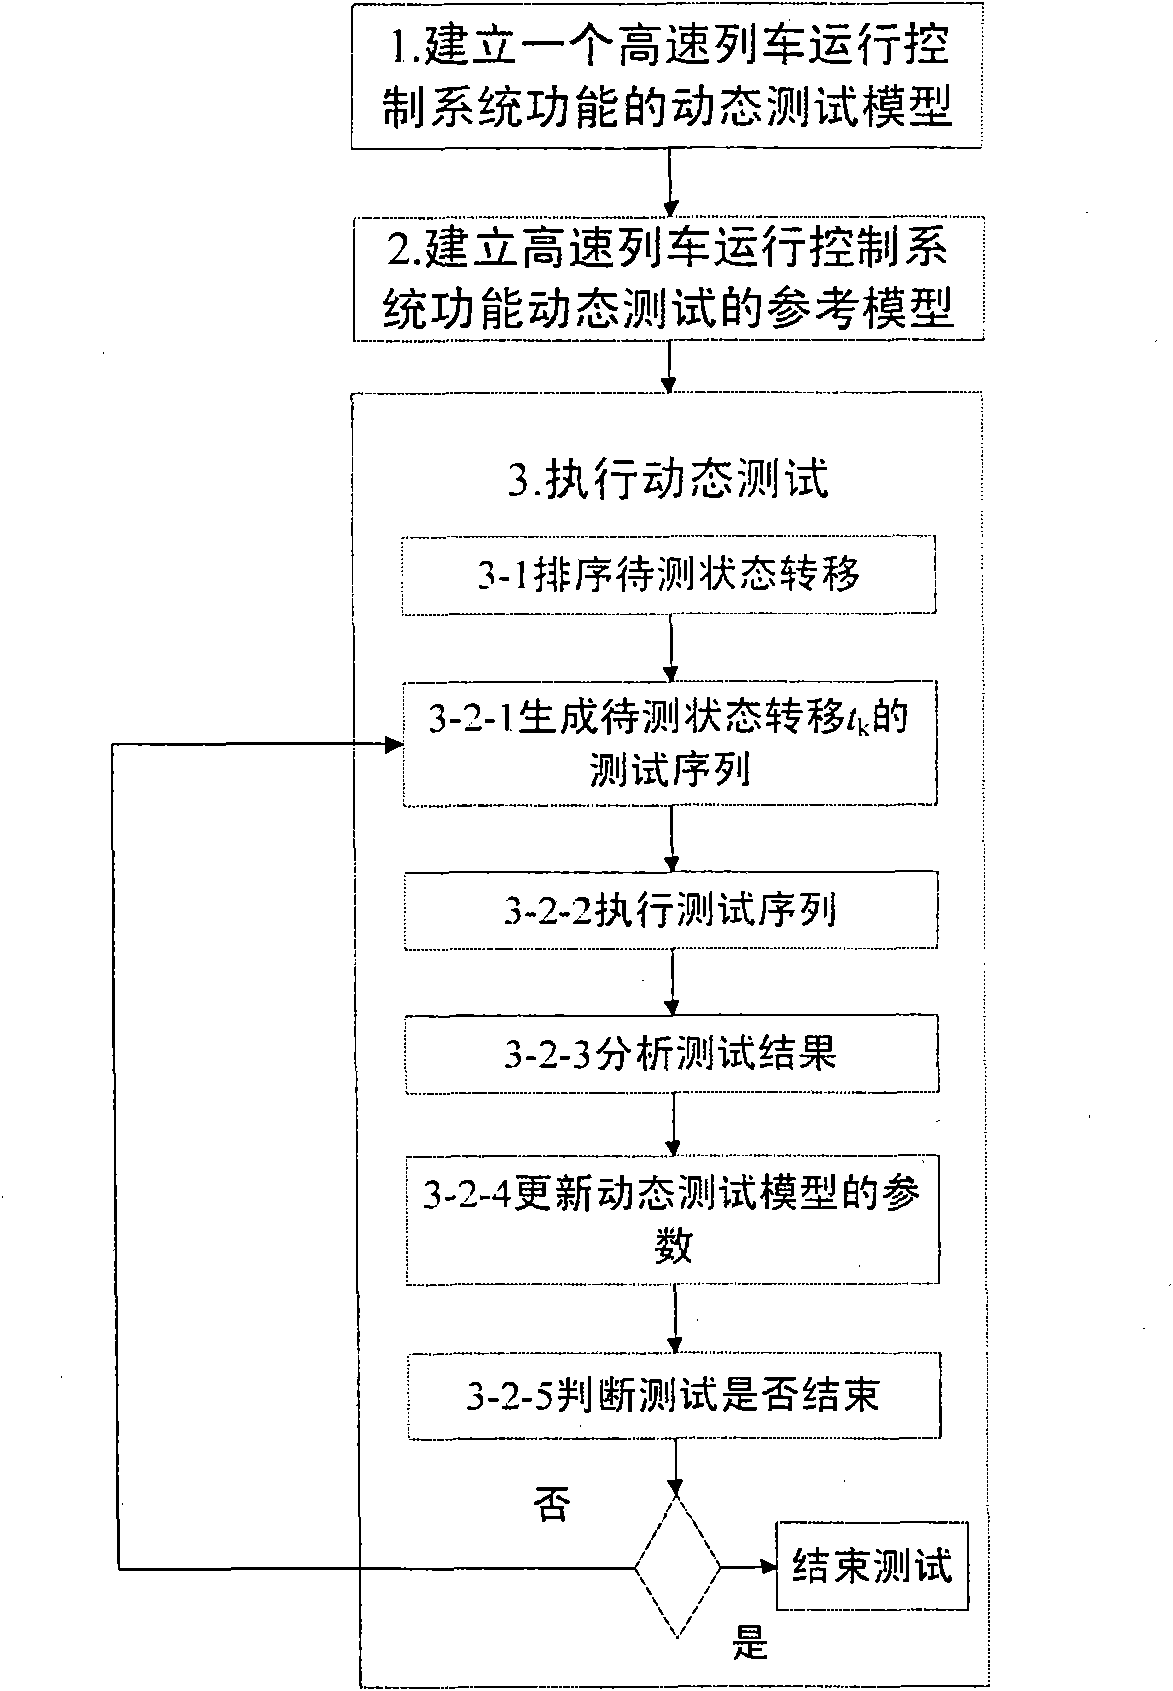 Dynamic function test method of high-speed train operation control system